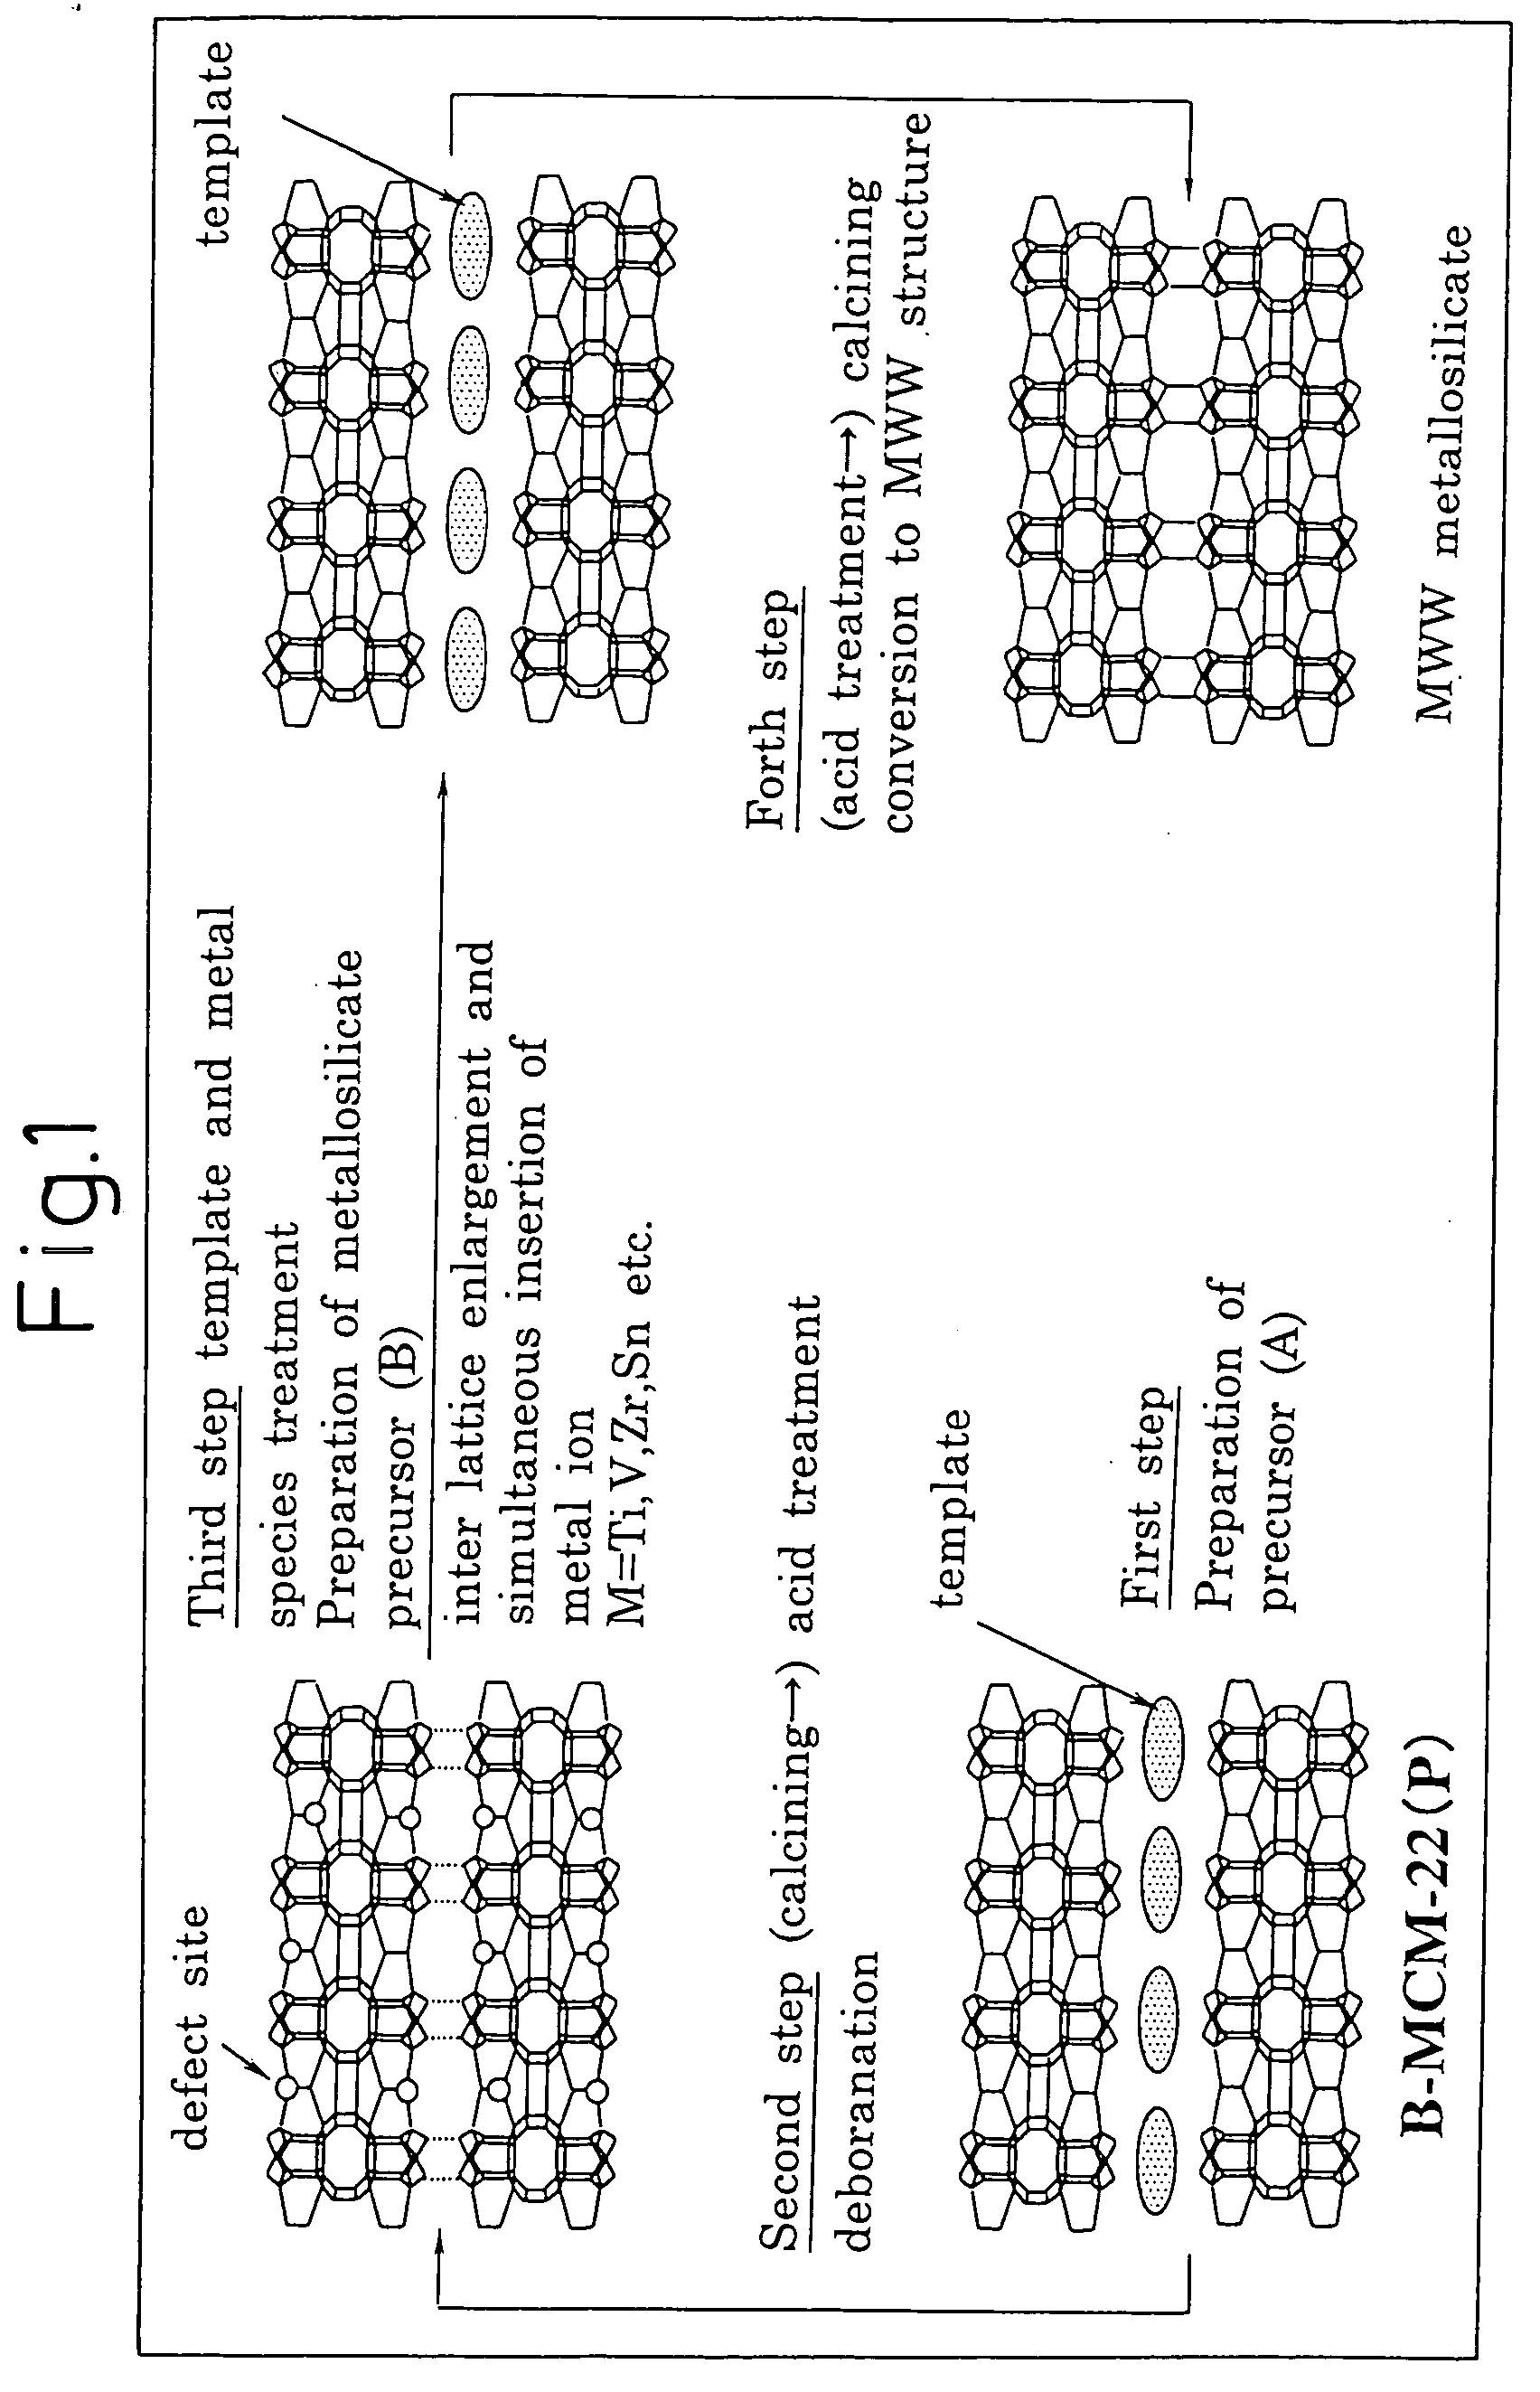 Mww type zeolite substance, precursor substance therefor, and process for producing these substances